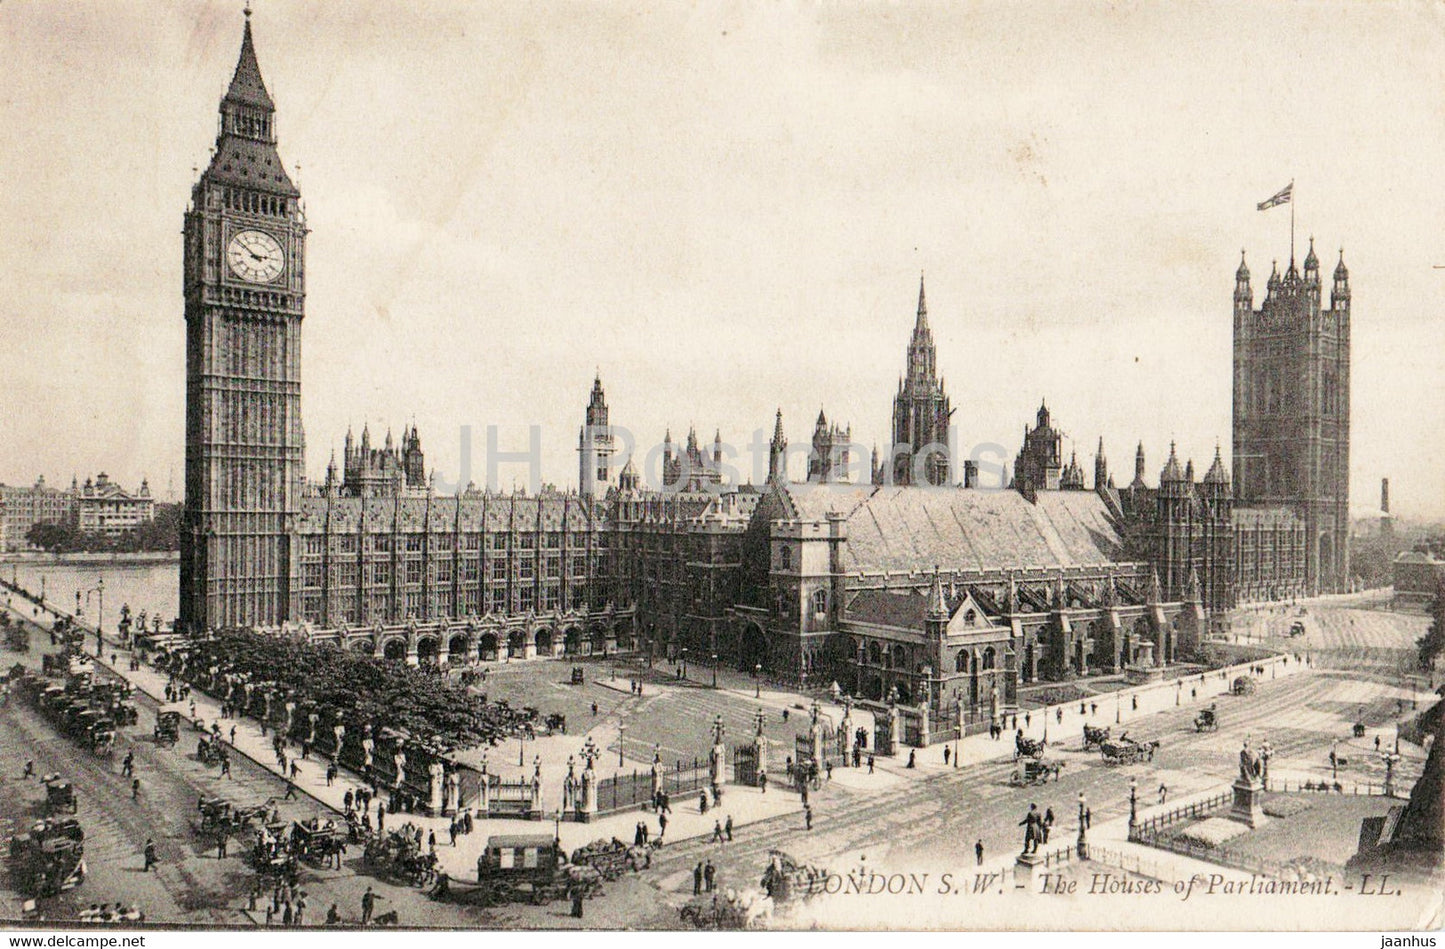 London - The Houses of Parliament - old postcard - England - 1906 - United Kingdom - used - JH Postcards